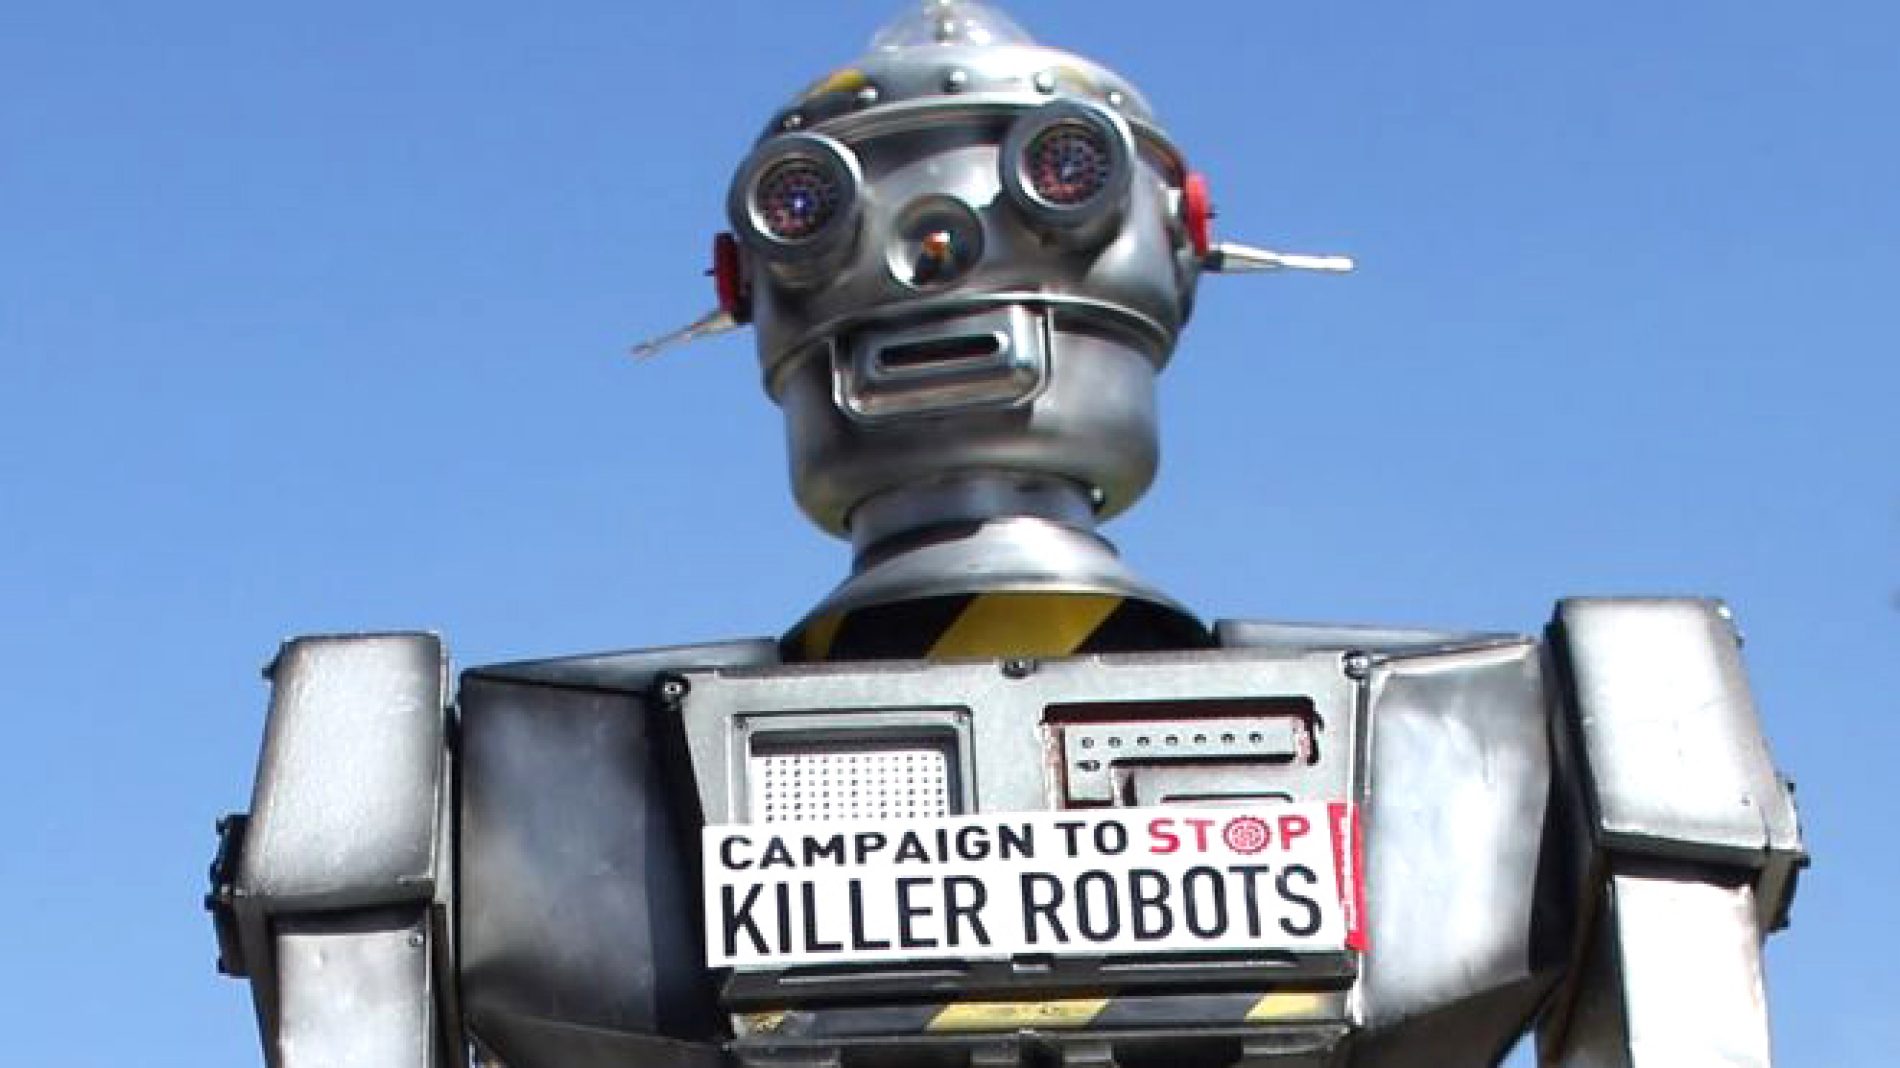 Campaign to stop “killer robots” launched in Cameroon